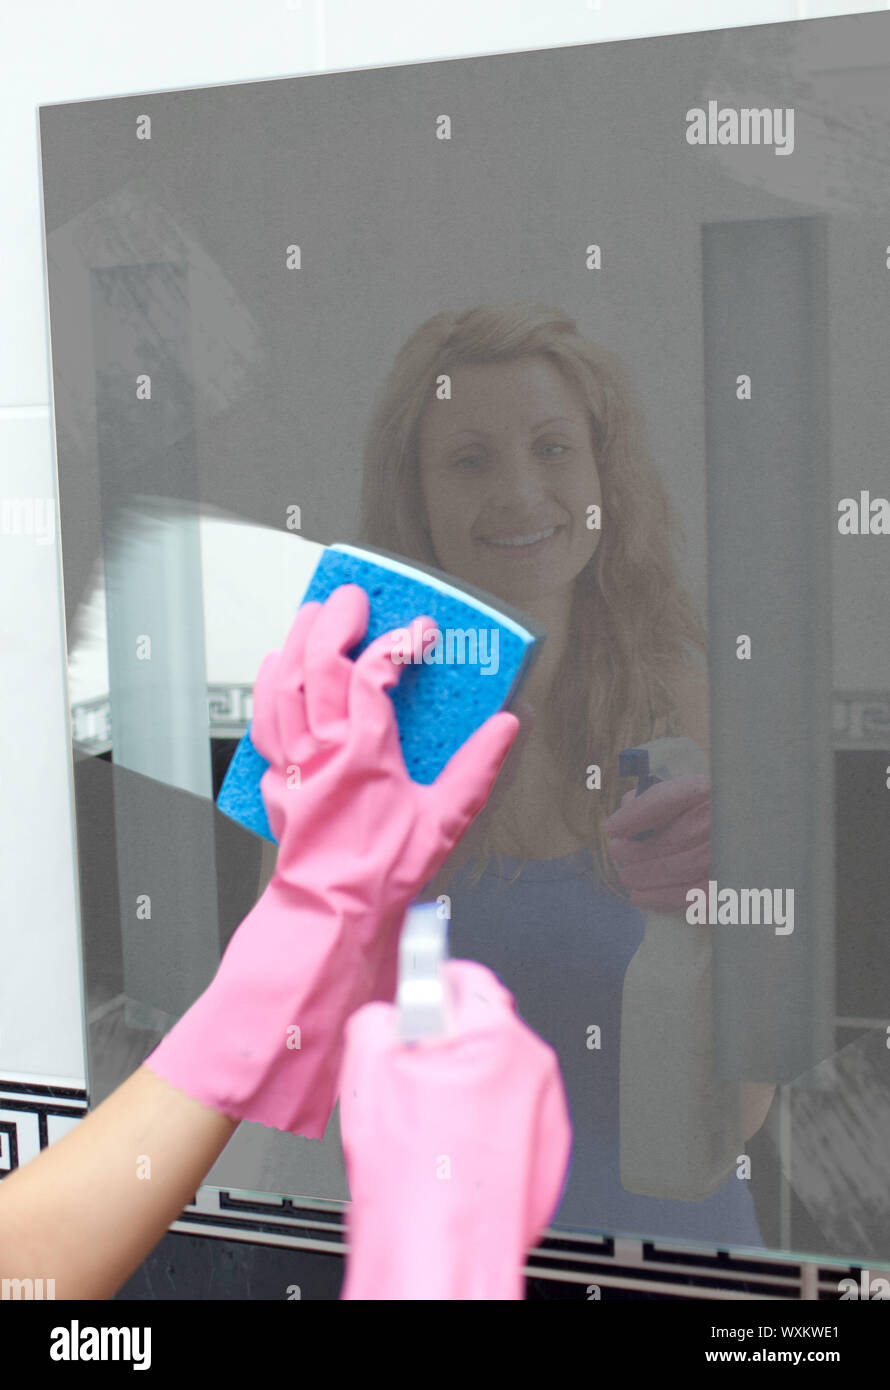 Smiling oman wiping dirt from bathroom mirror using sponge and spray bottle Stock Photo